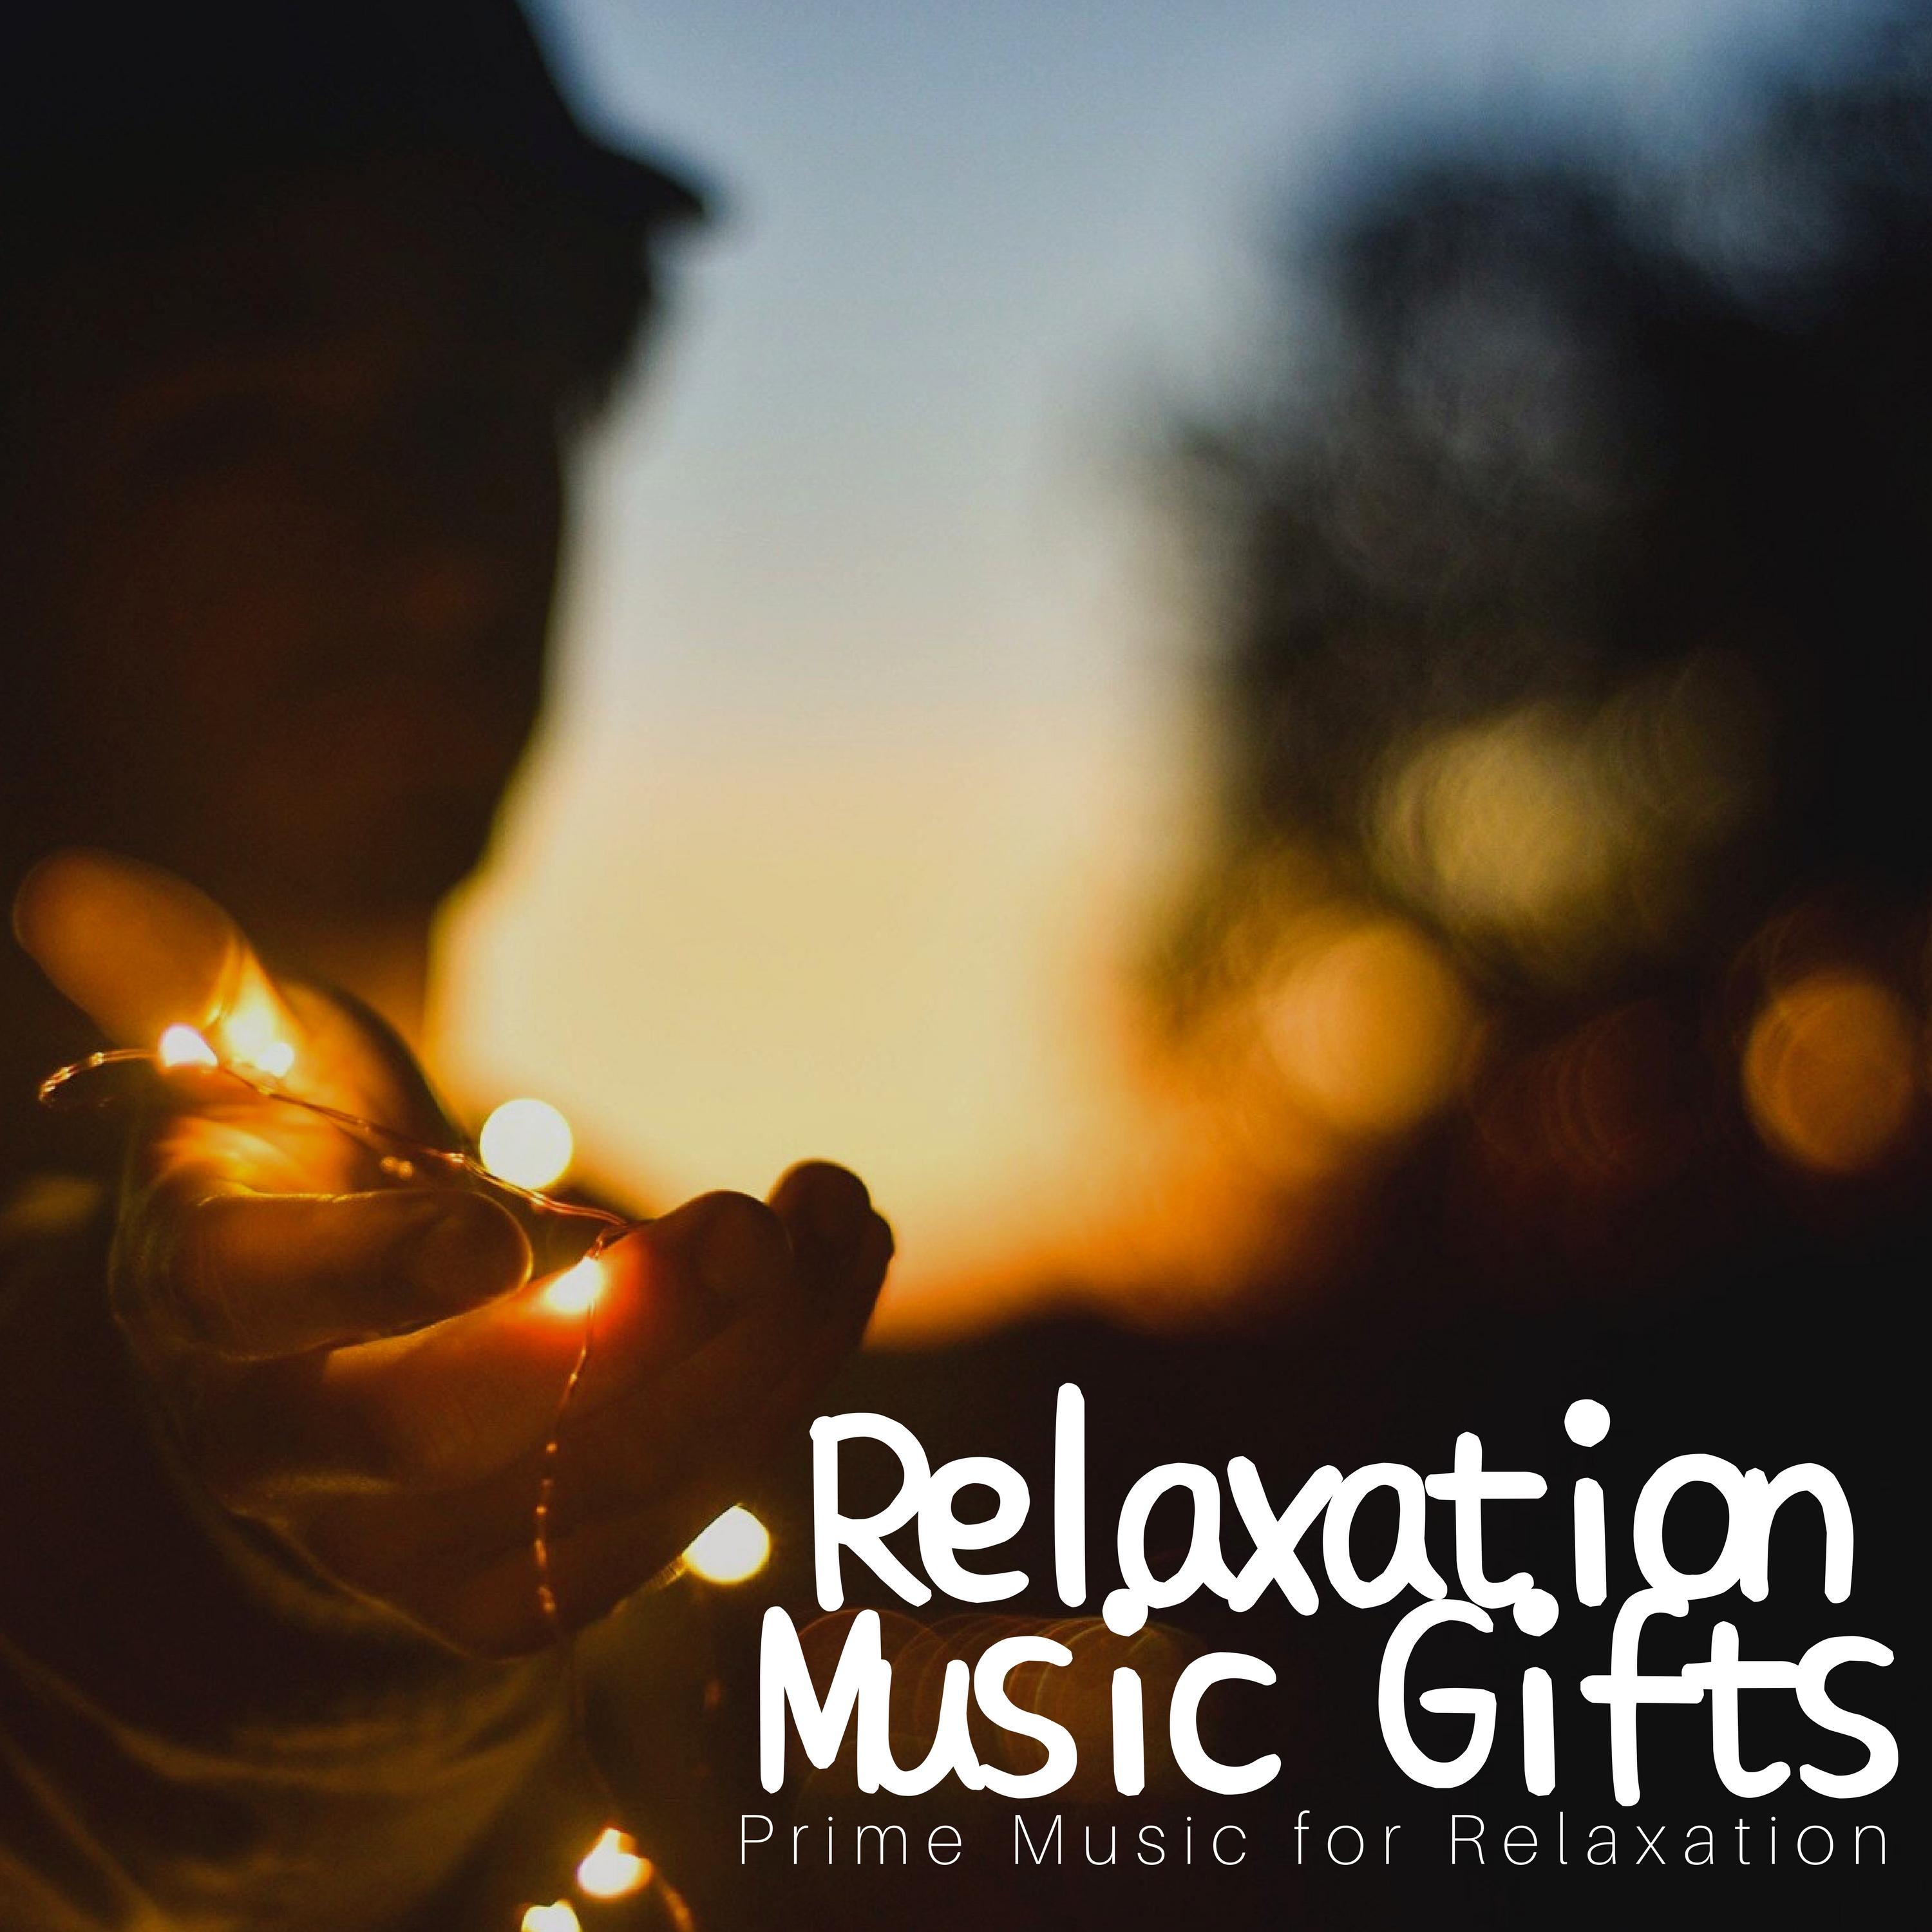 Relaxation Music Gifts - Prime Music for Relaxation and Stress Reduction